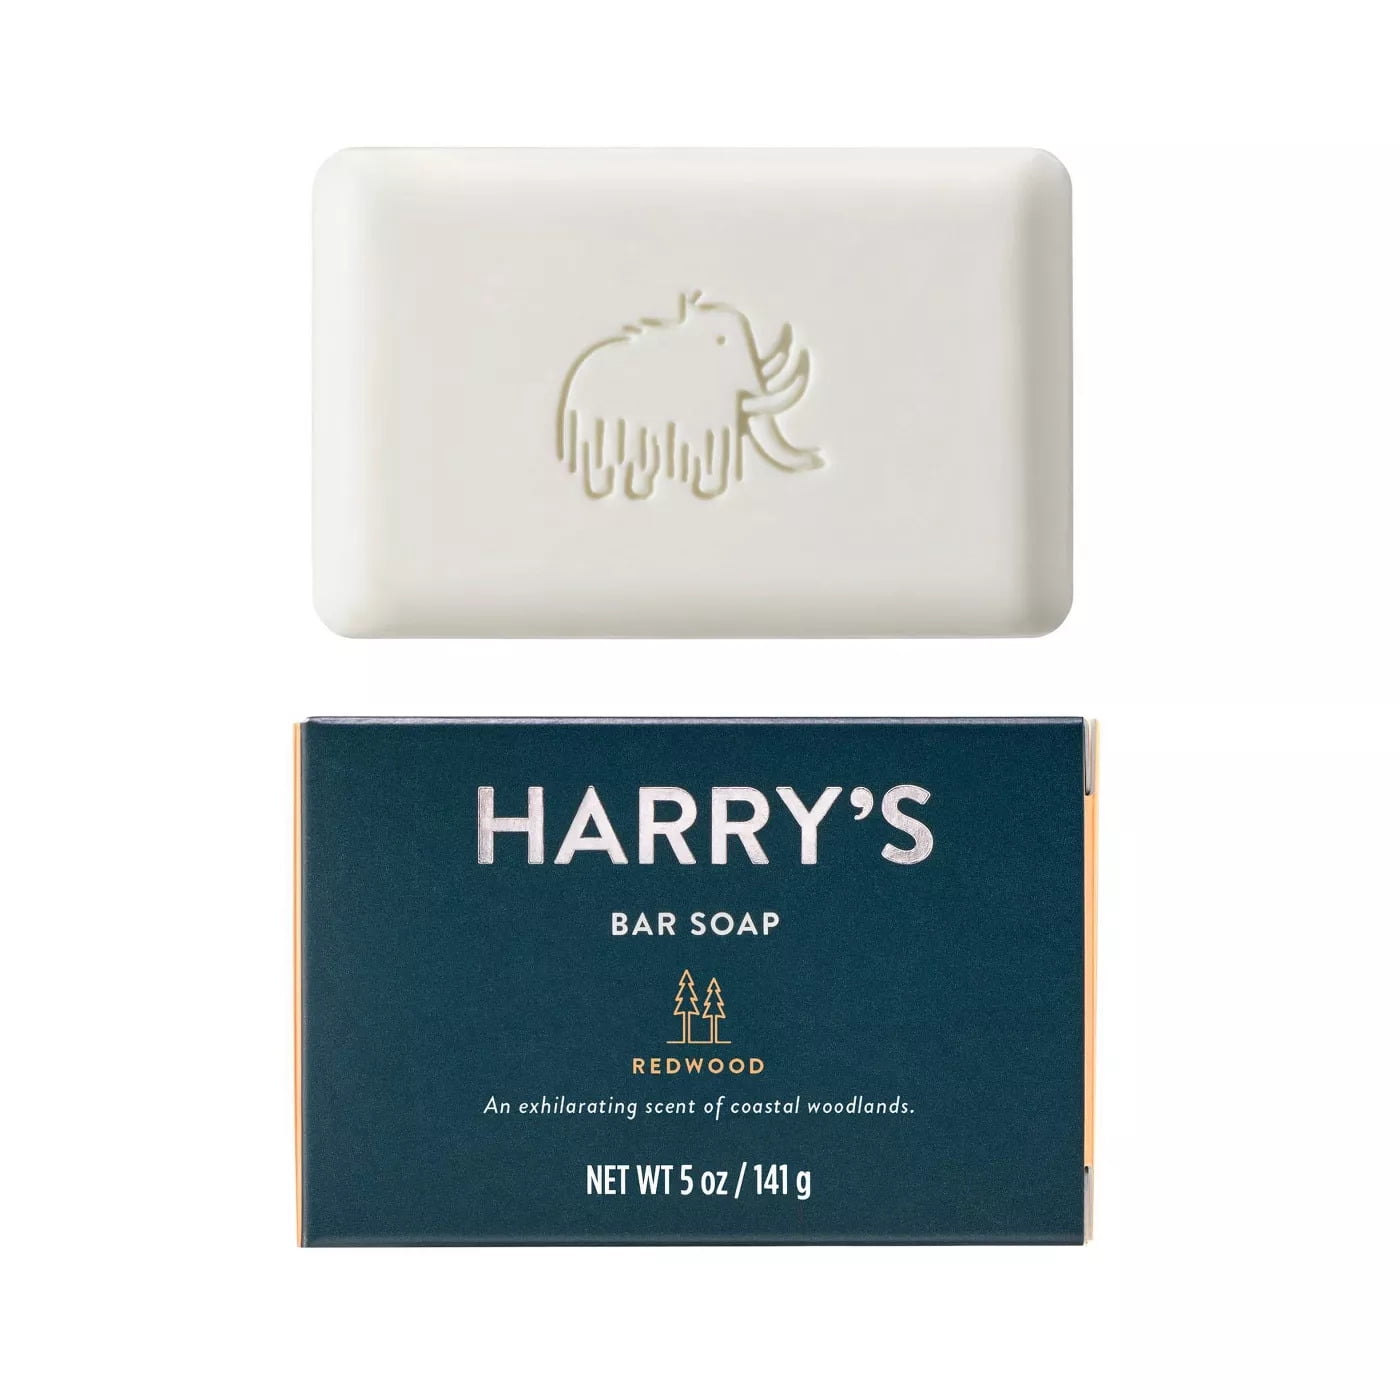 Harry's Redwood Bar soap Review 